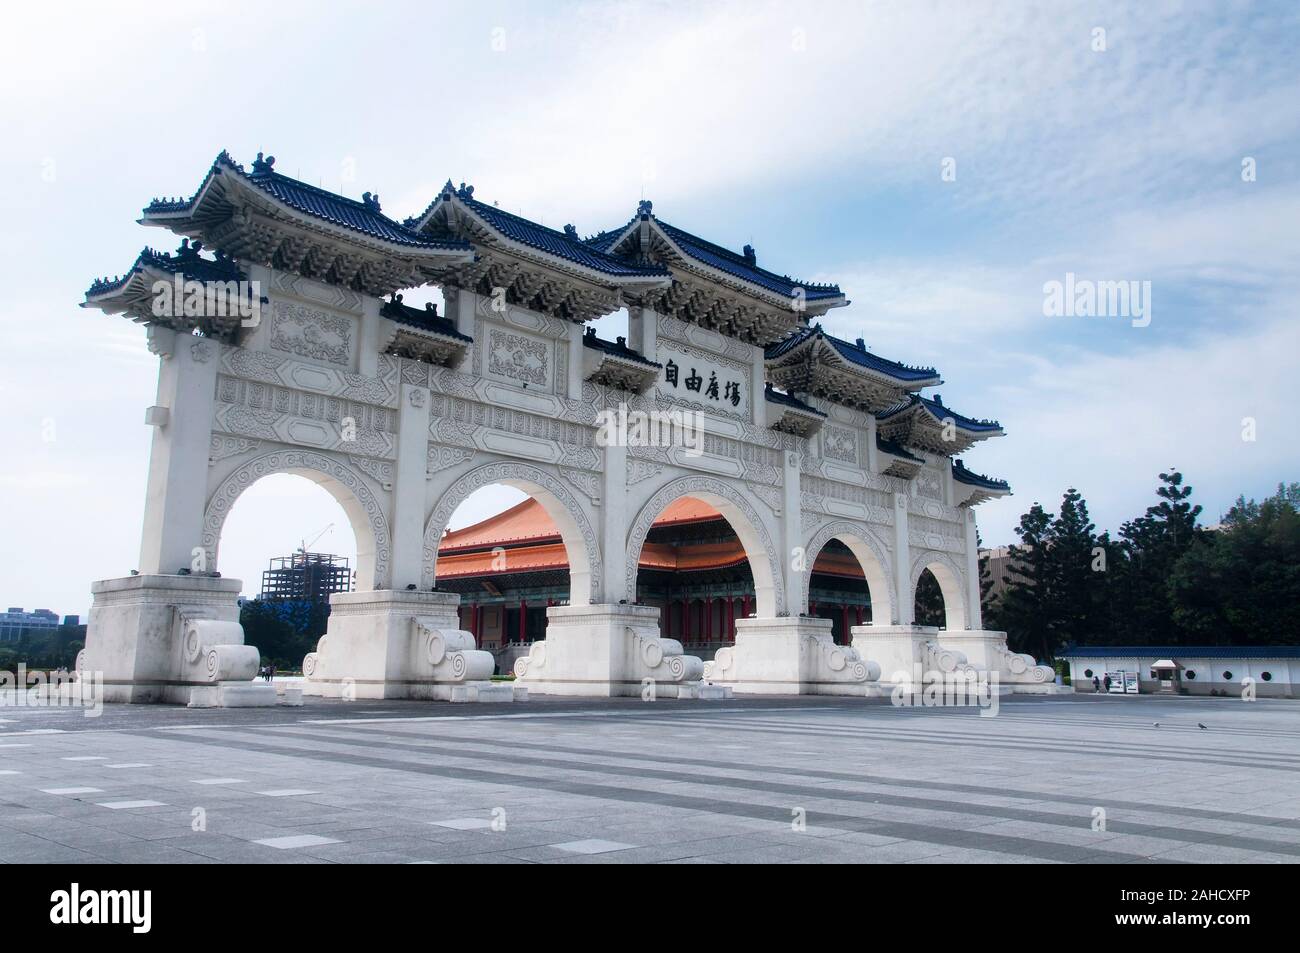 The iconic freedom square gate into the Zhongzheng Memorial Hall Park in Taipei Taiwan.  Chinese translation Zi You Guang Chang means liberty square. Stock Photo